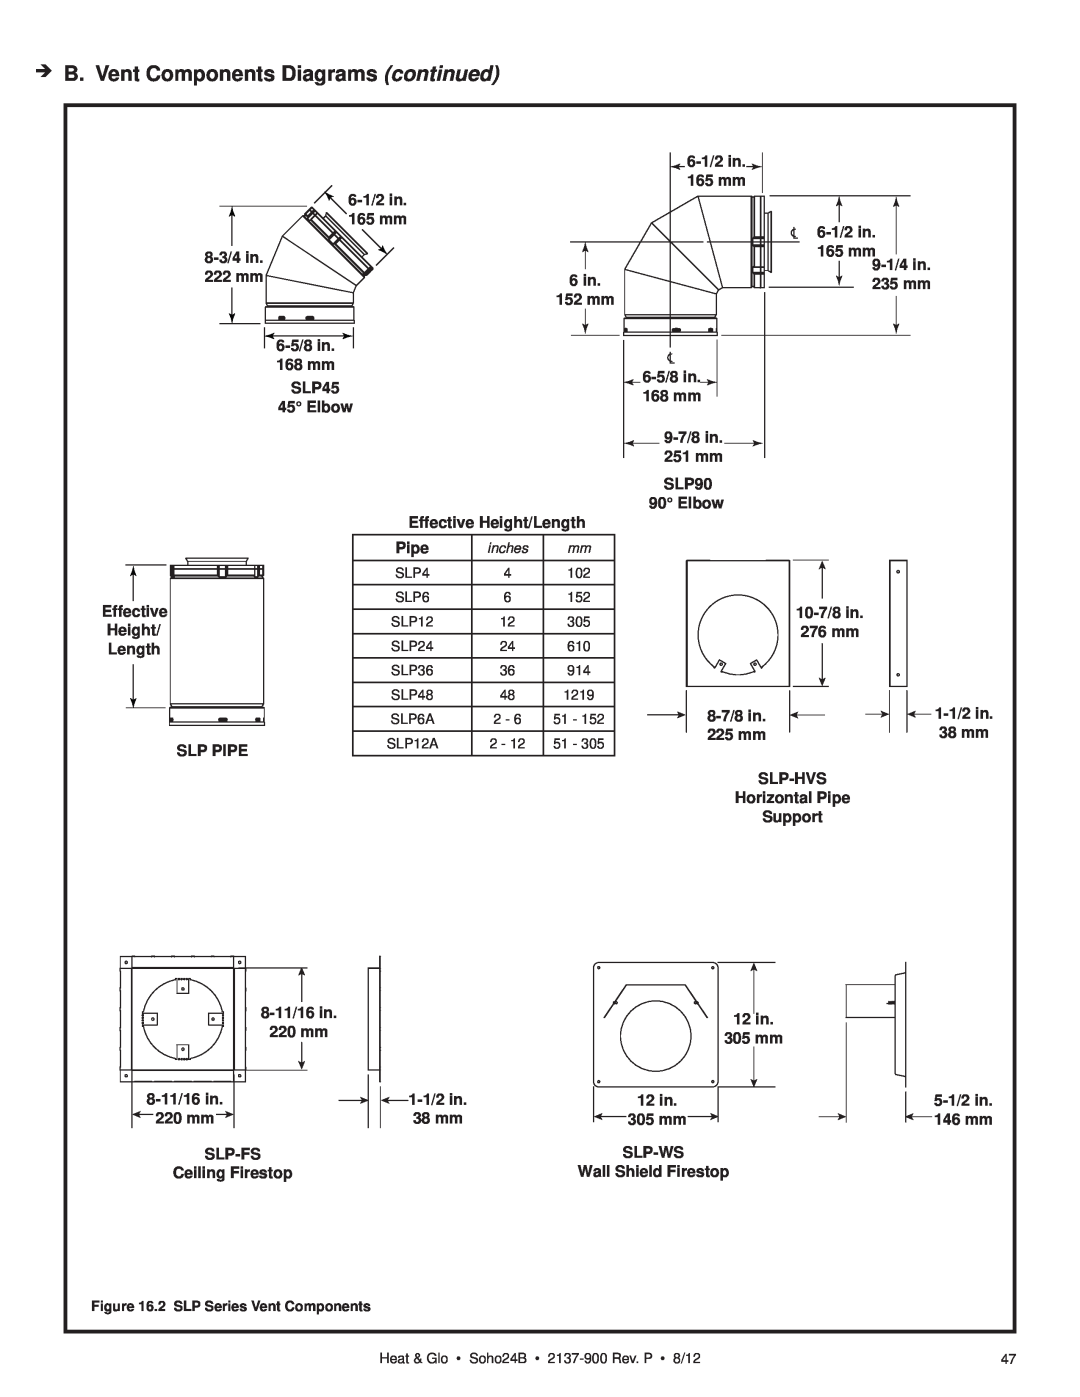 Heat & Glo LifeStyle 2137-900 B. Vent Components Diagrams continued, 8-3/4in 222 mm, 6-1/2in, 6 in, 165 mm9-1/4in 